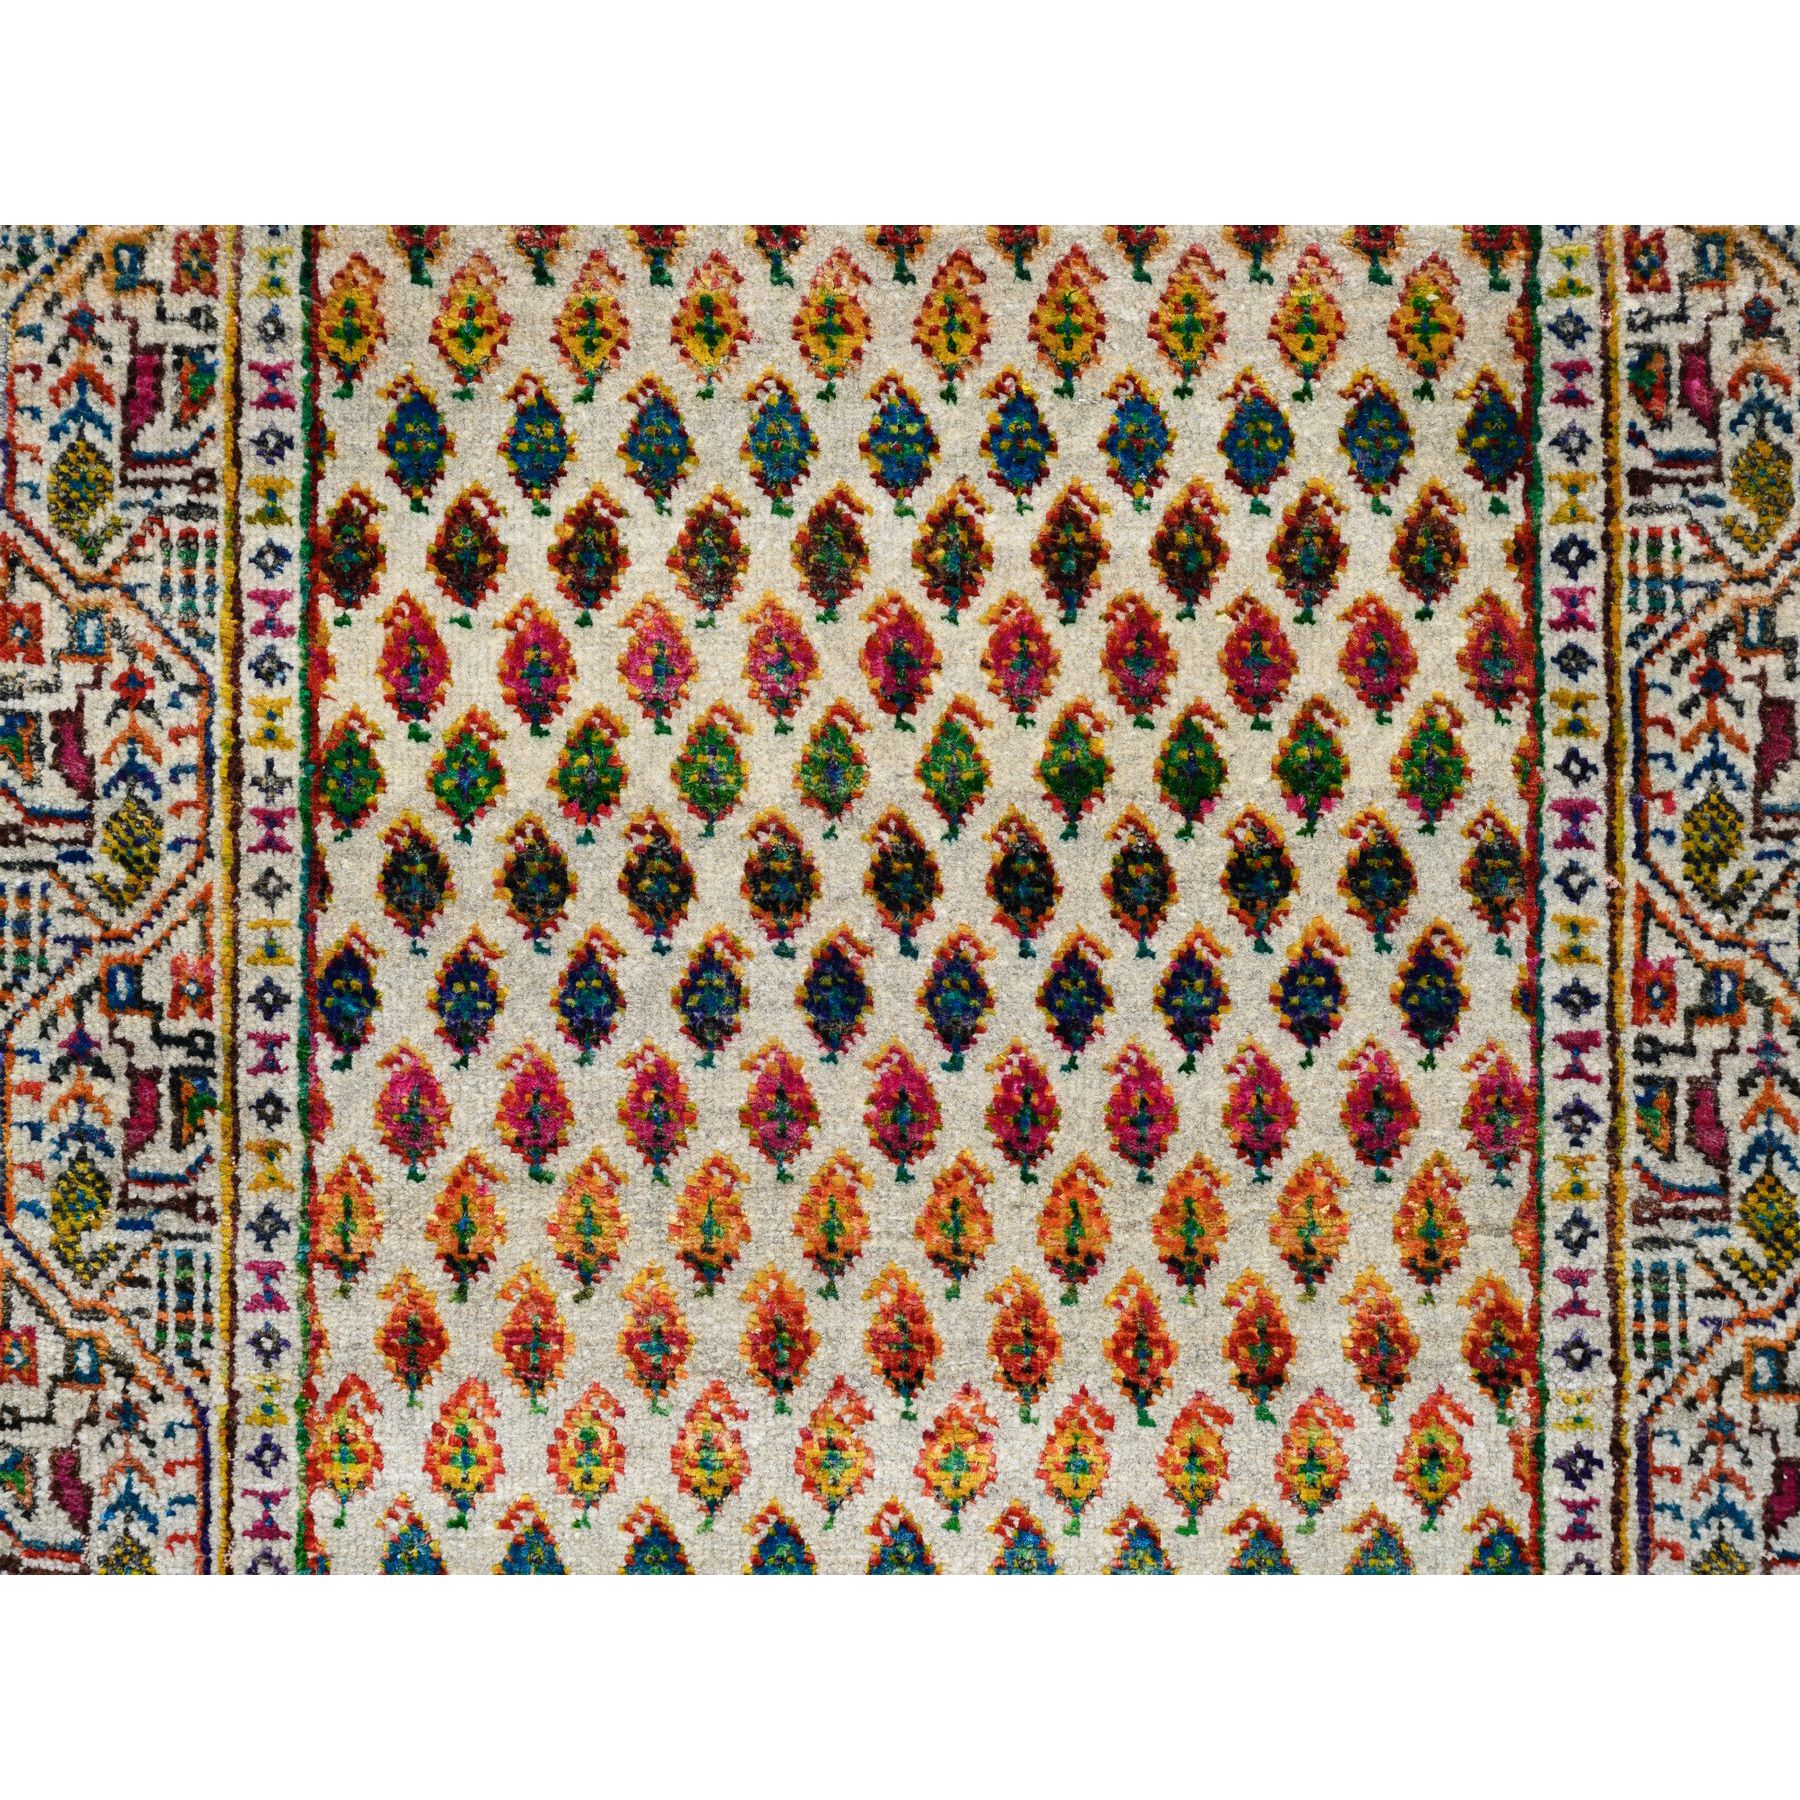 2'5"x12' Beige Sarouk Mir Inspired With Repetitive Boteh Design Colorful Wool And Sari Silk Hand Woven Oriental Runner Rug 